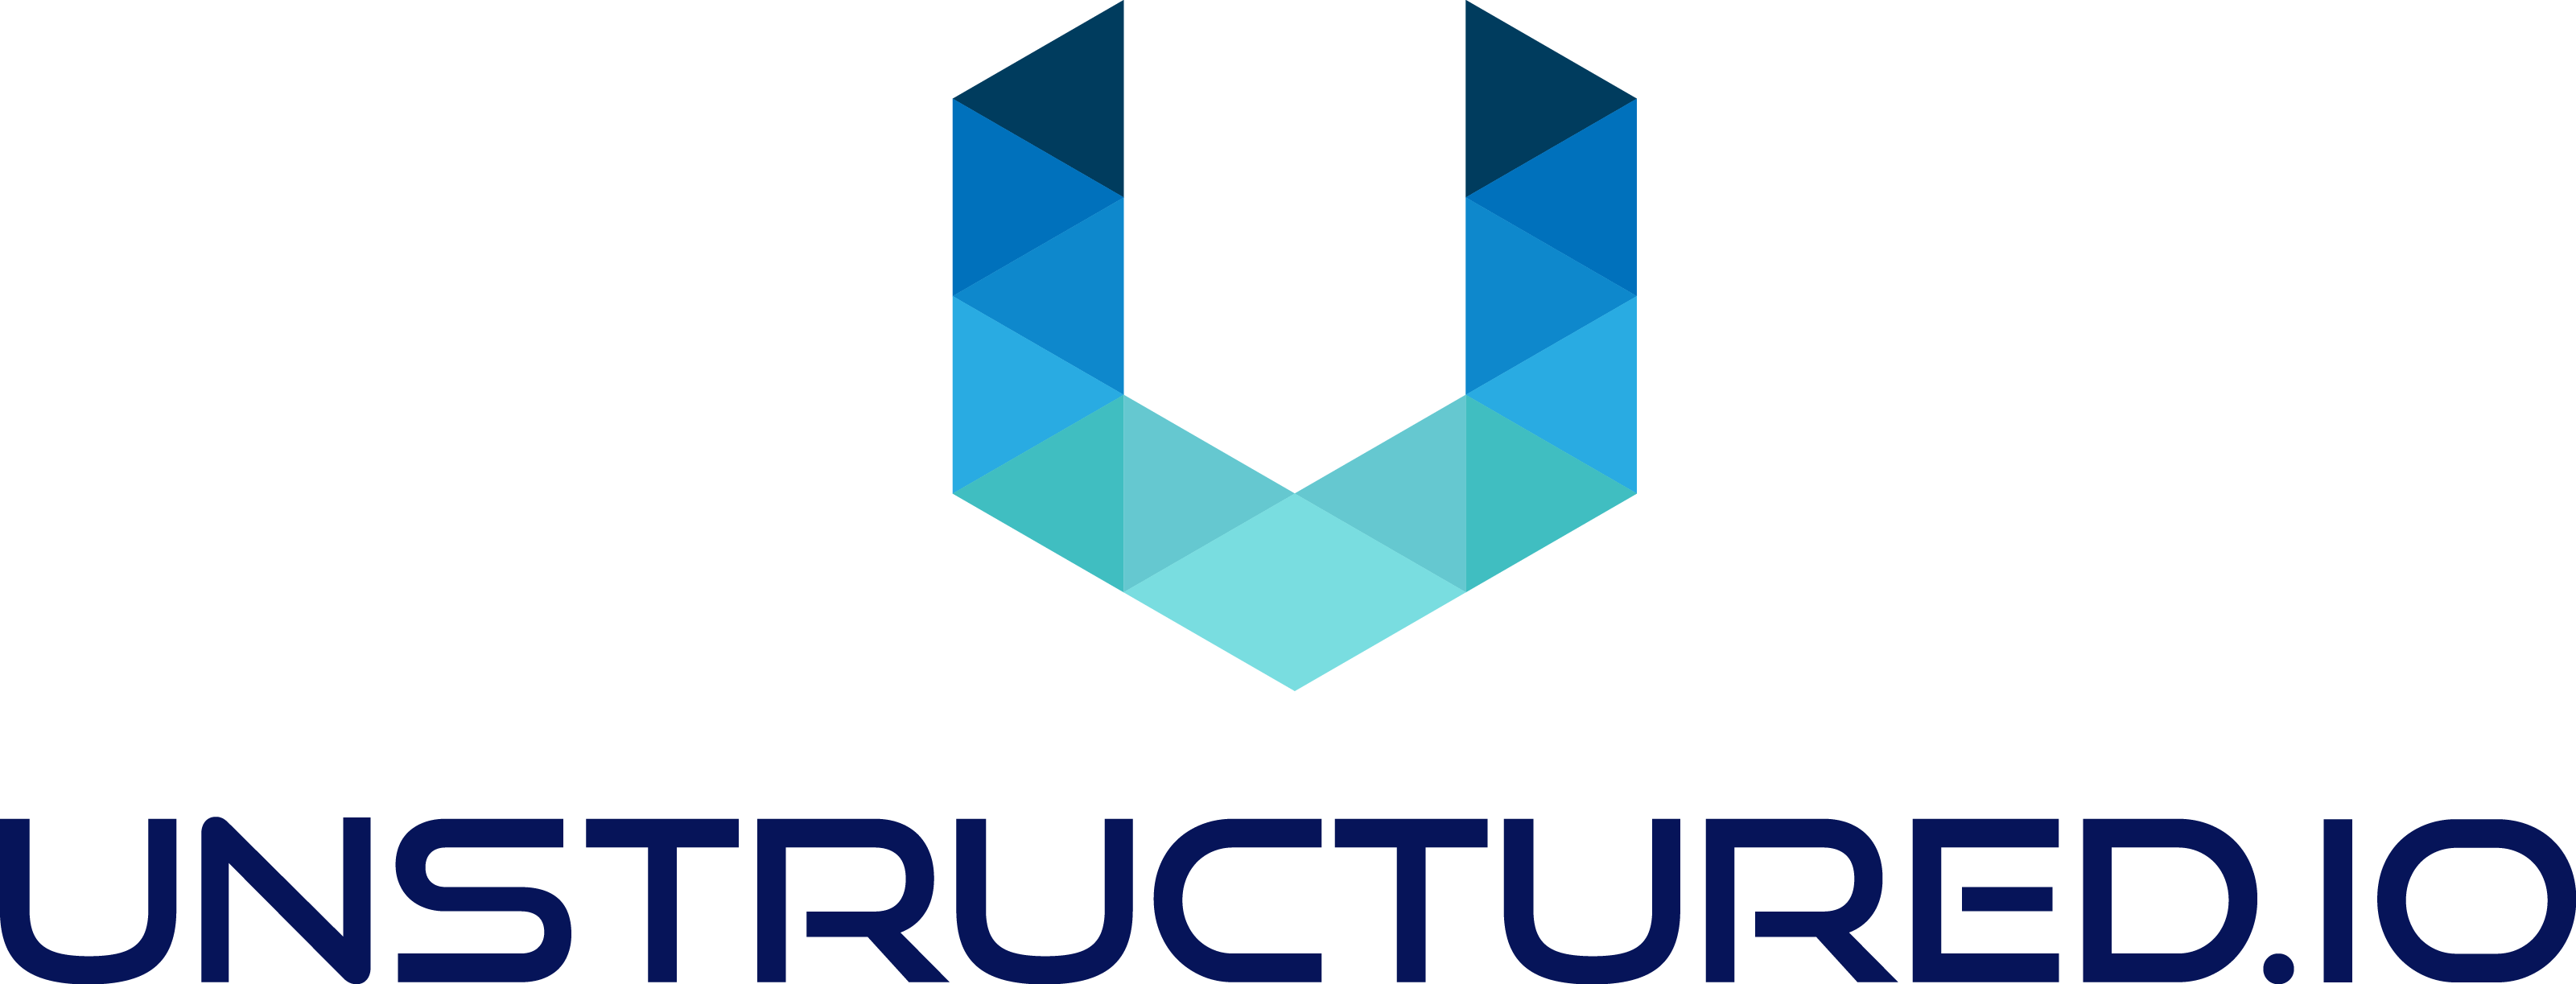 unstructured_logo.png